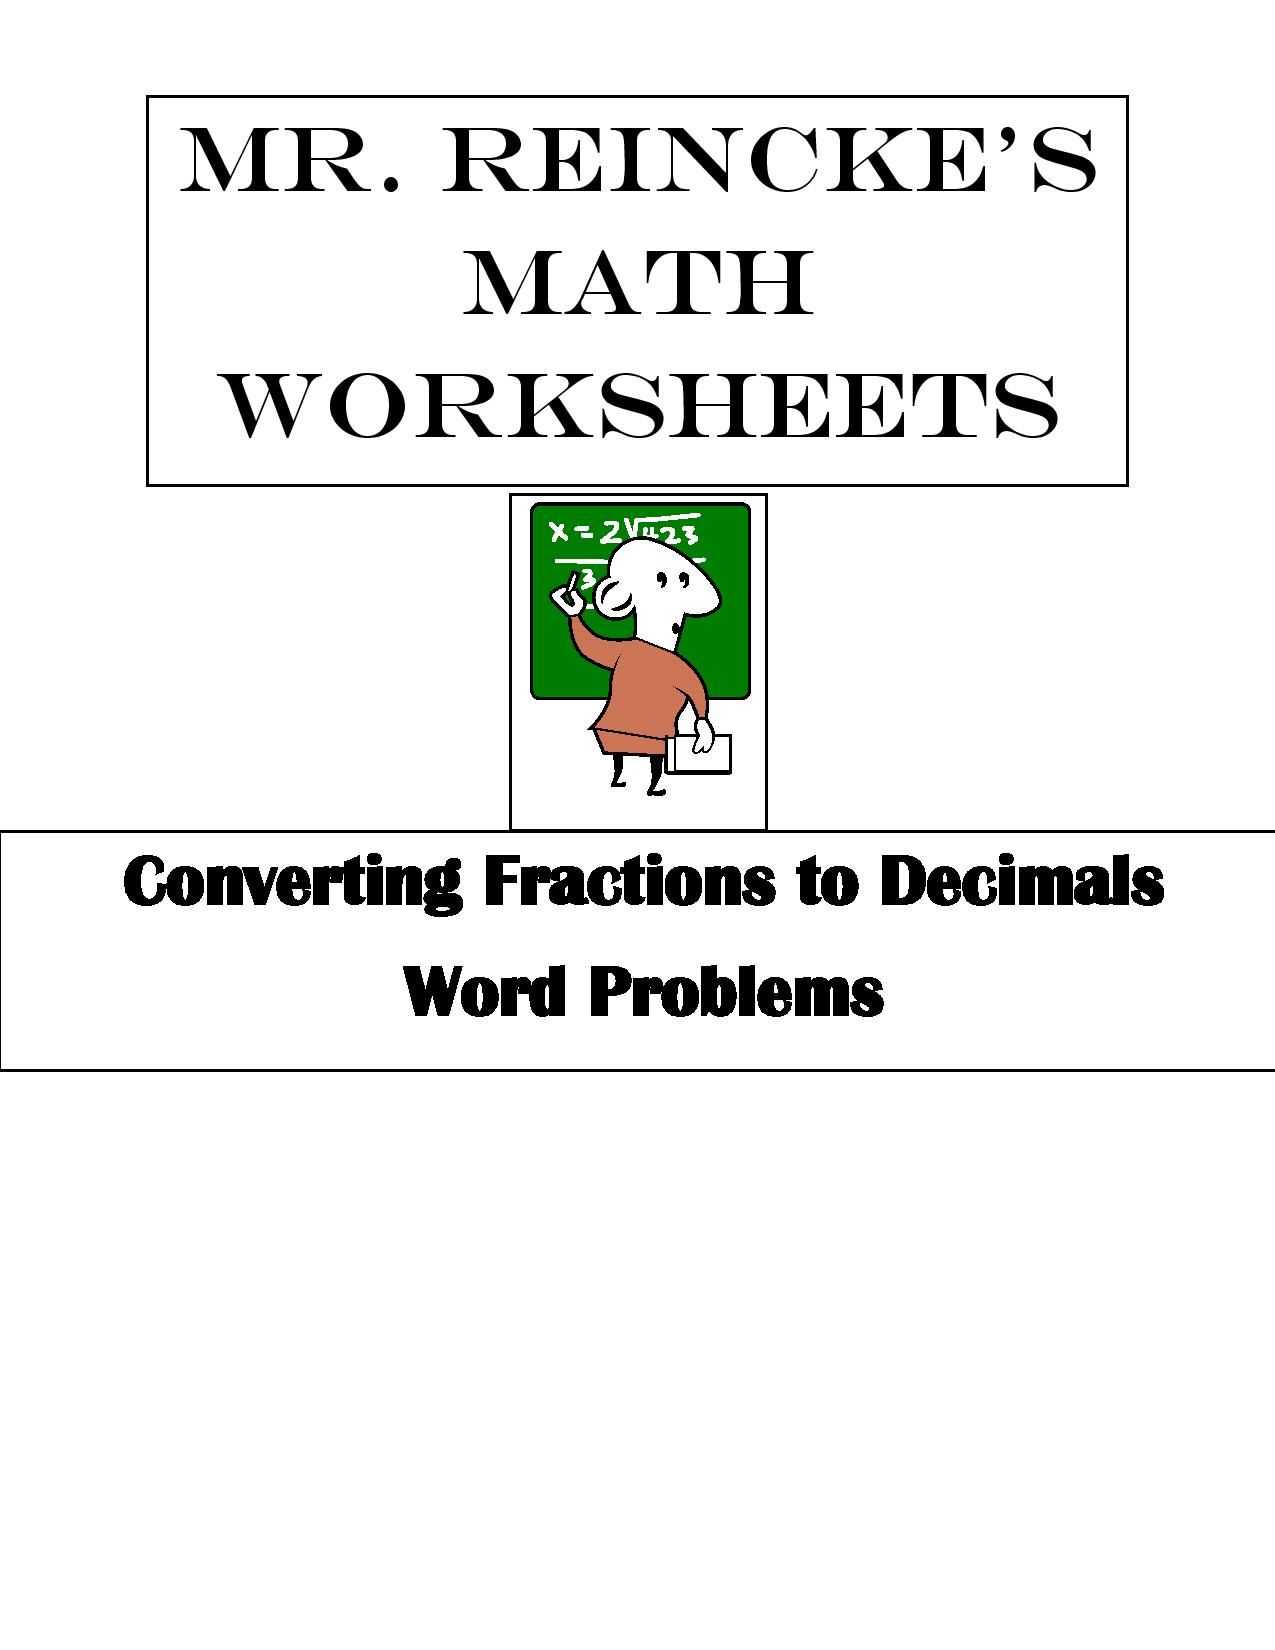 Proportion Word Problems Worksheet 7th Grade together with Converting Fractions to Decimals Word Problems 4 Worksheets